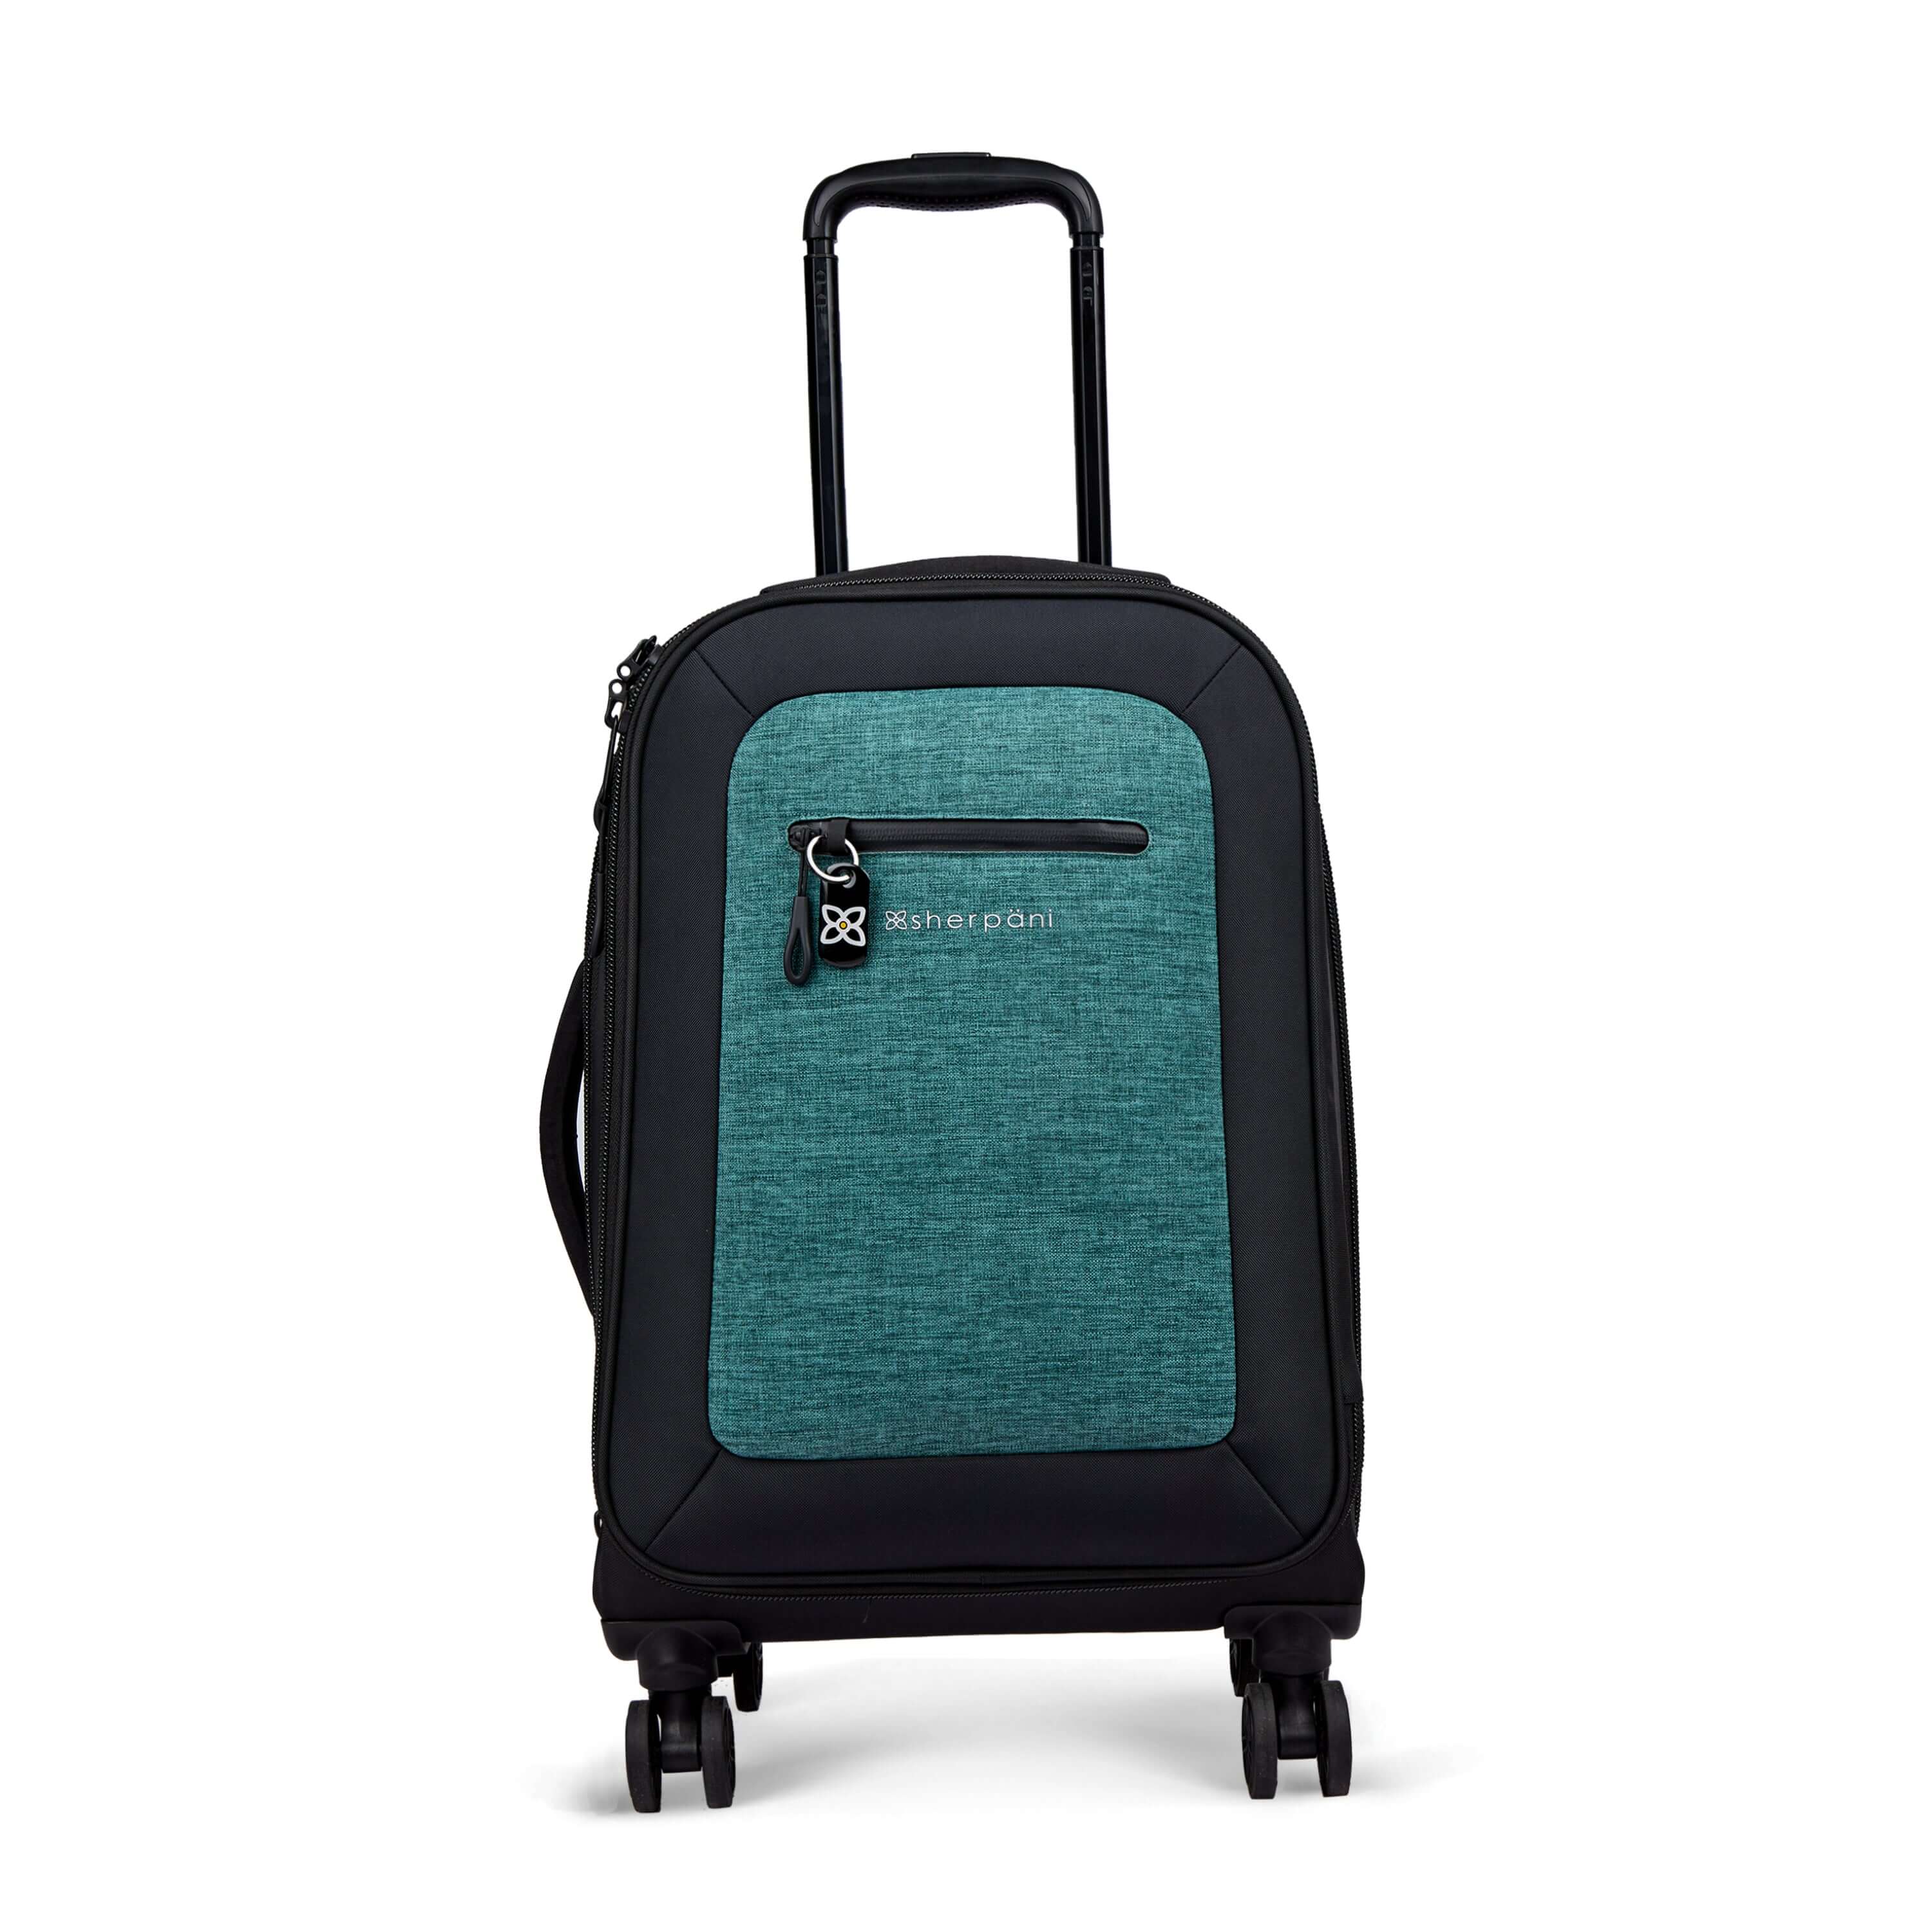 Flat front view of Sherpani’s Anti-Theft luggage the Latitude in Teal. The suitcase has a soft shell exterior made from recycled plastic bottles and features vegan leather accents in black. 